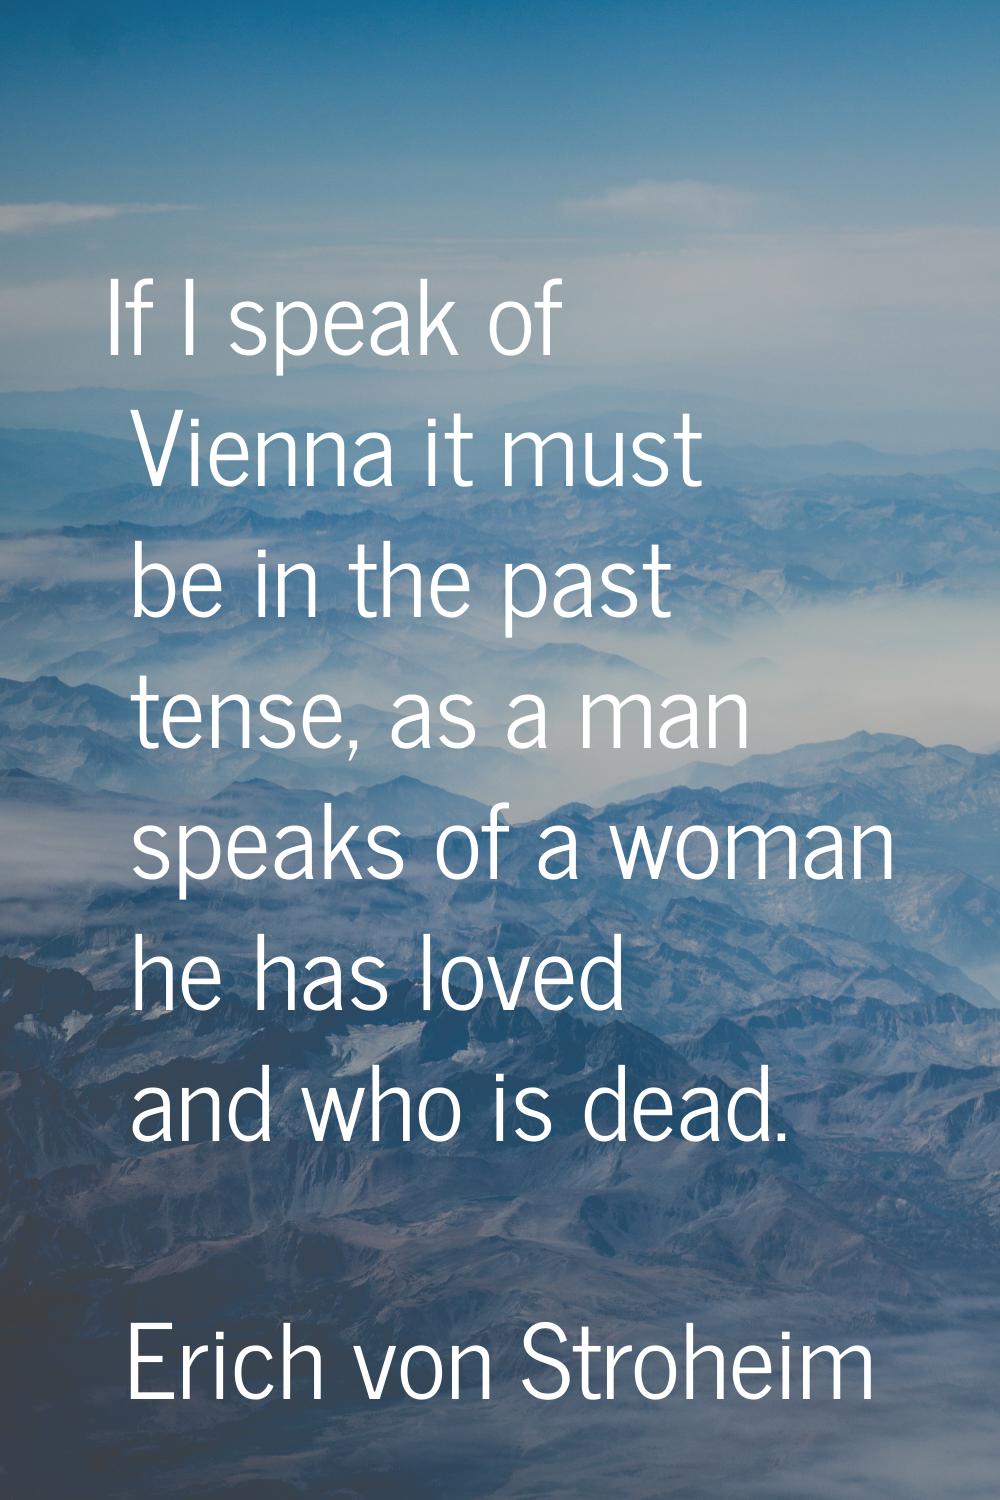 If I speak of Vienna it must be in the past tense, as a man speaks of a woman he has loved and who 